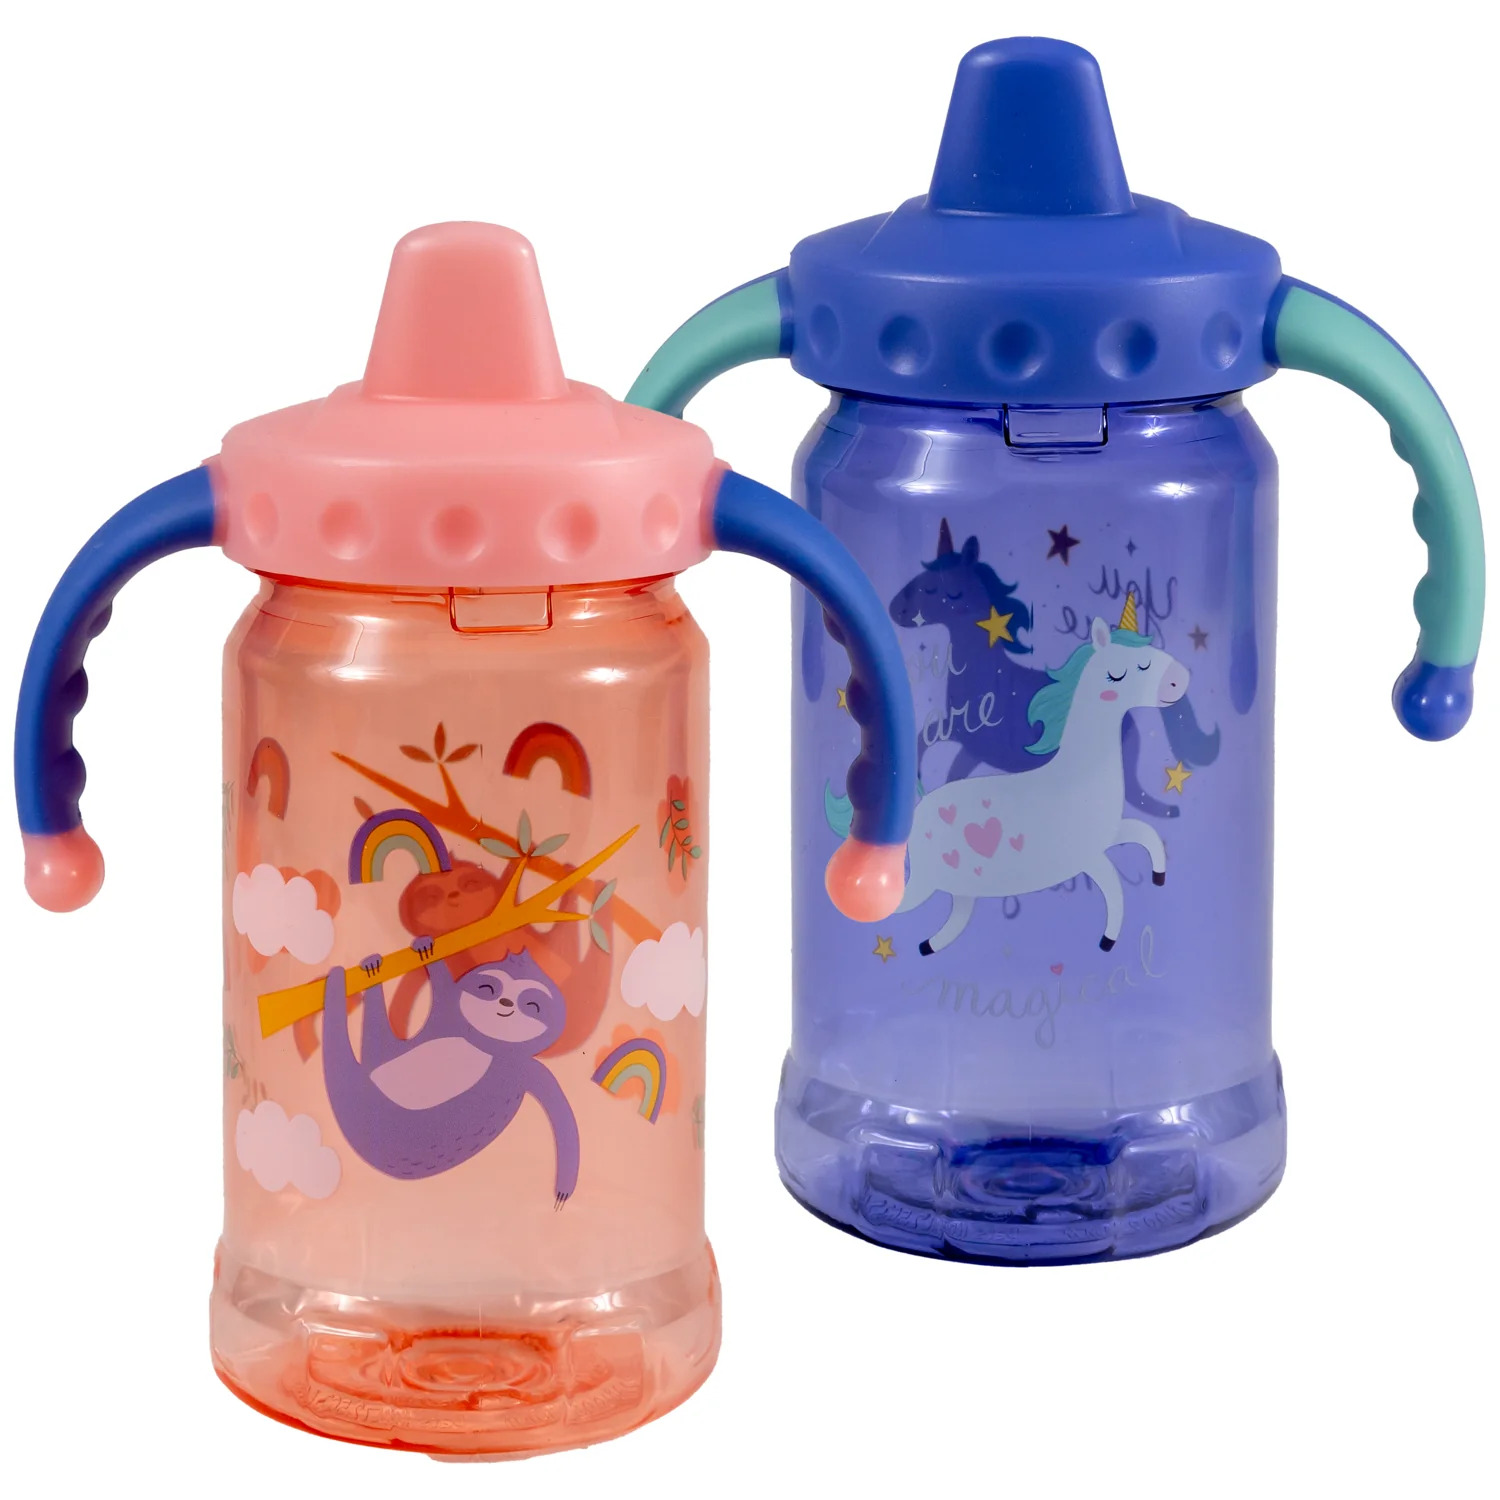 COOL GEAR 2-Pack 12 oz Gripper Sipper Cups For Kids & Toddlers - Dishwasher Safe, Spillproof, Leakproof Waterbottle With Handles For Babies - image 1 of 8